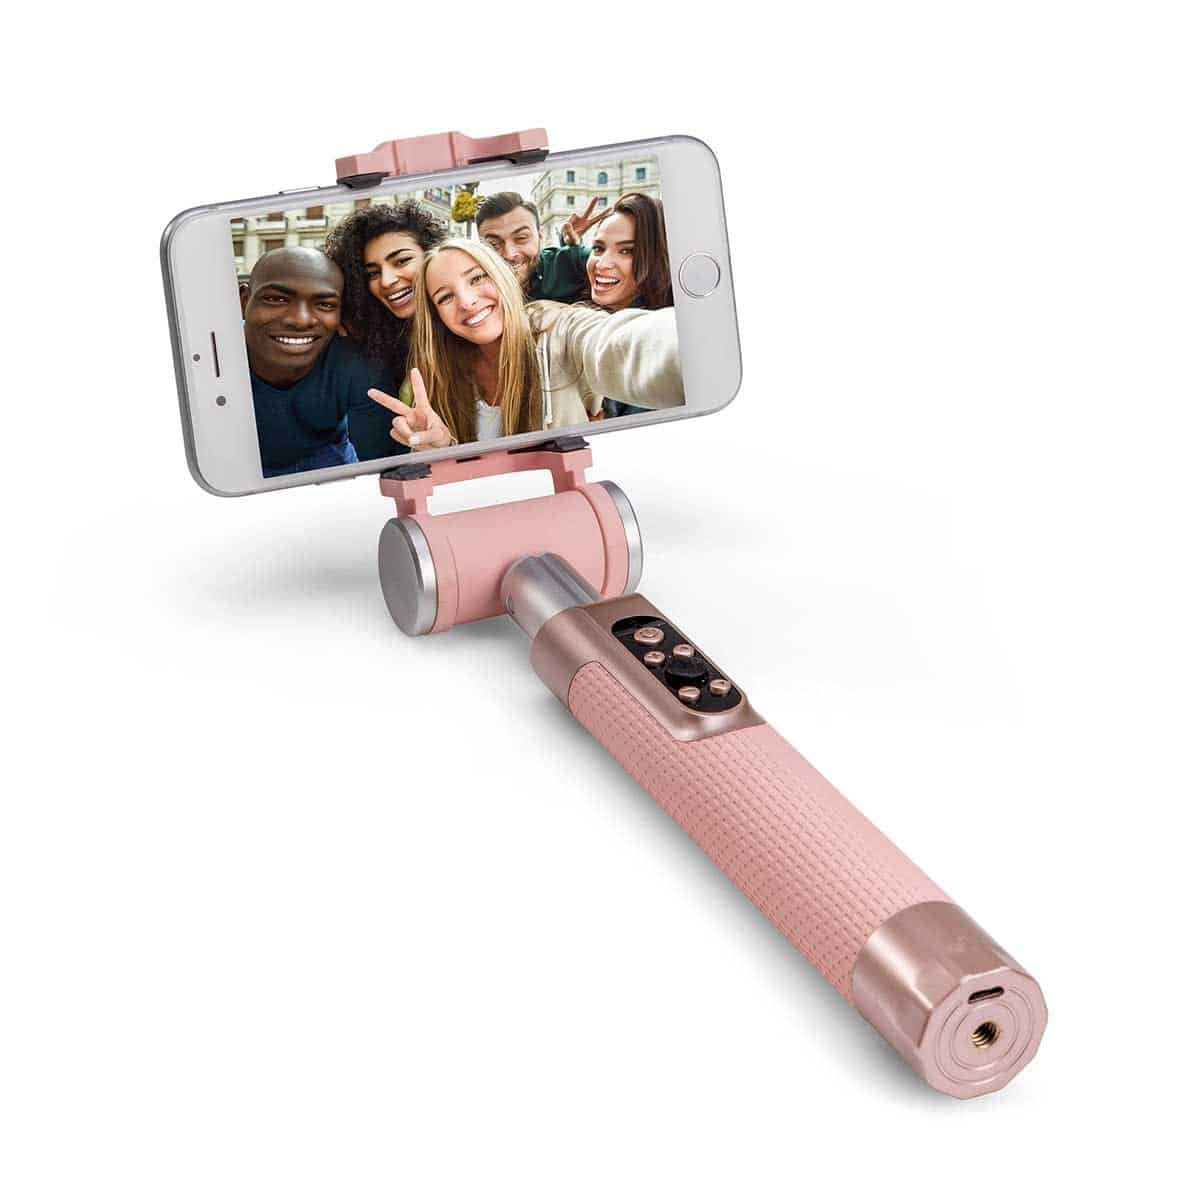  gadgets for capturing better pictures and videos on your smartphone